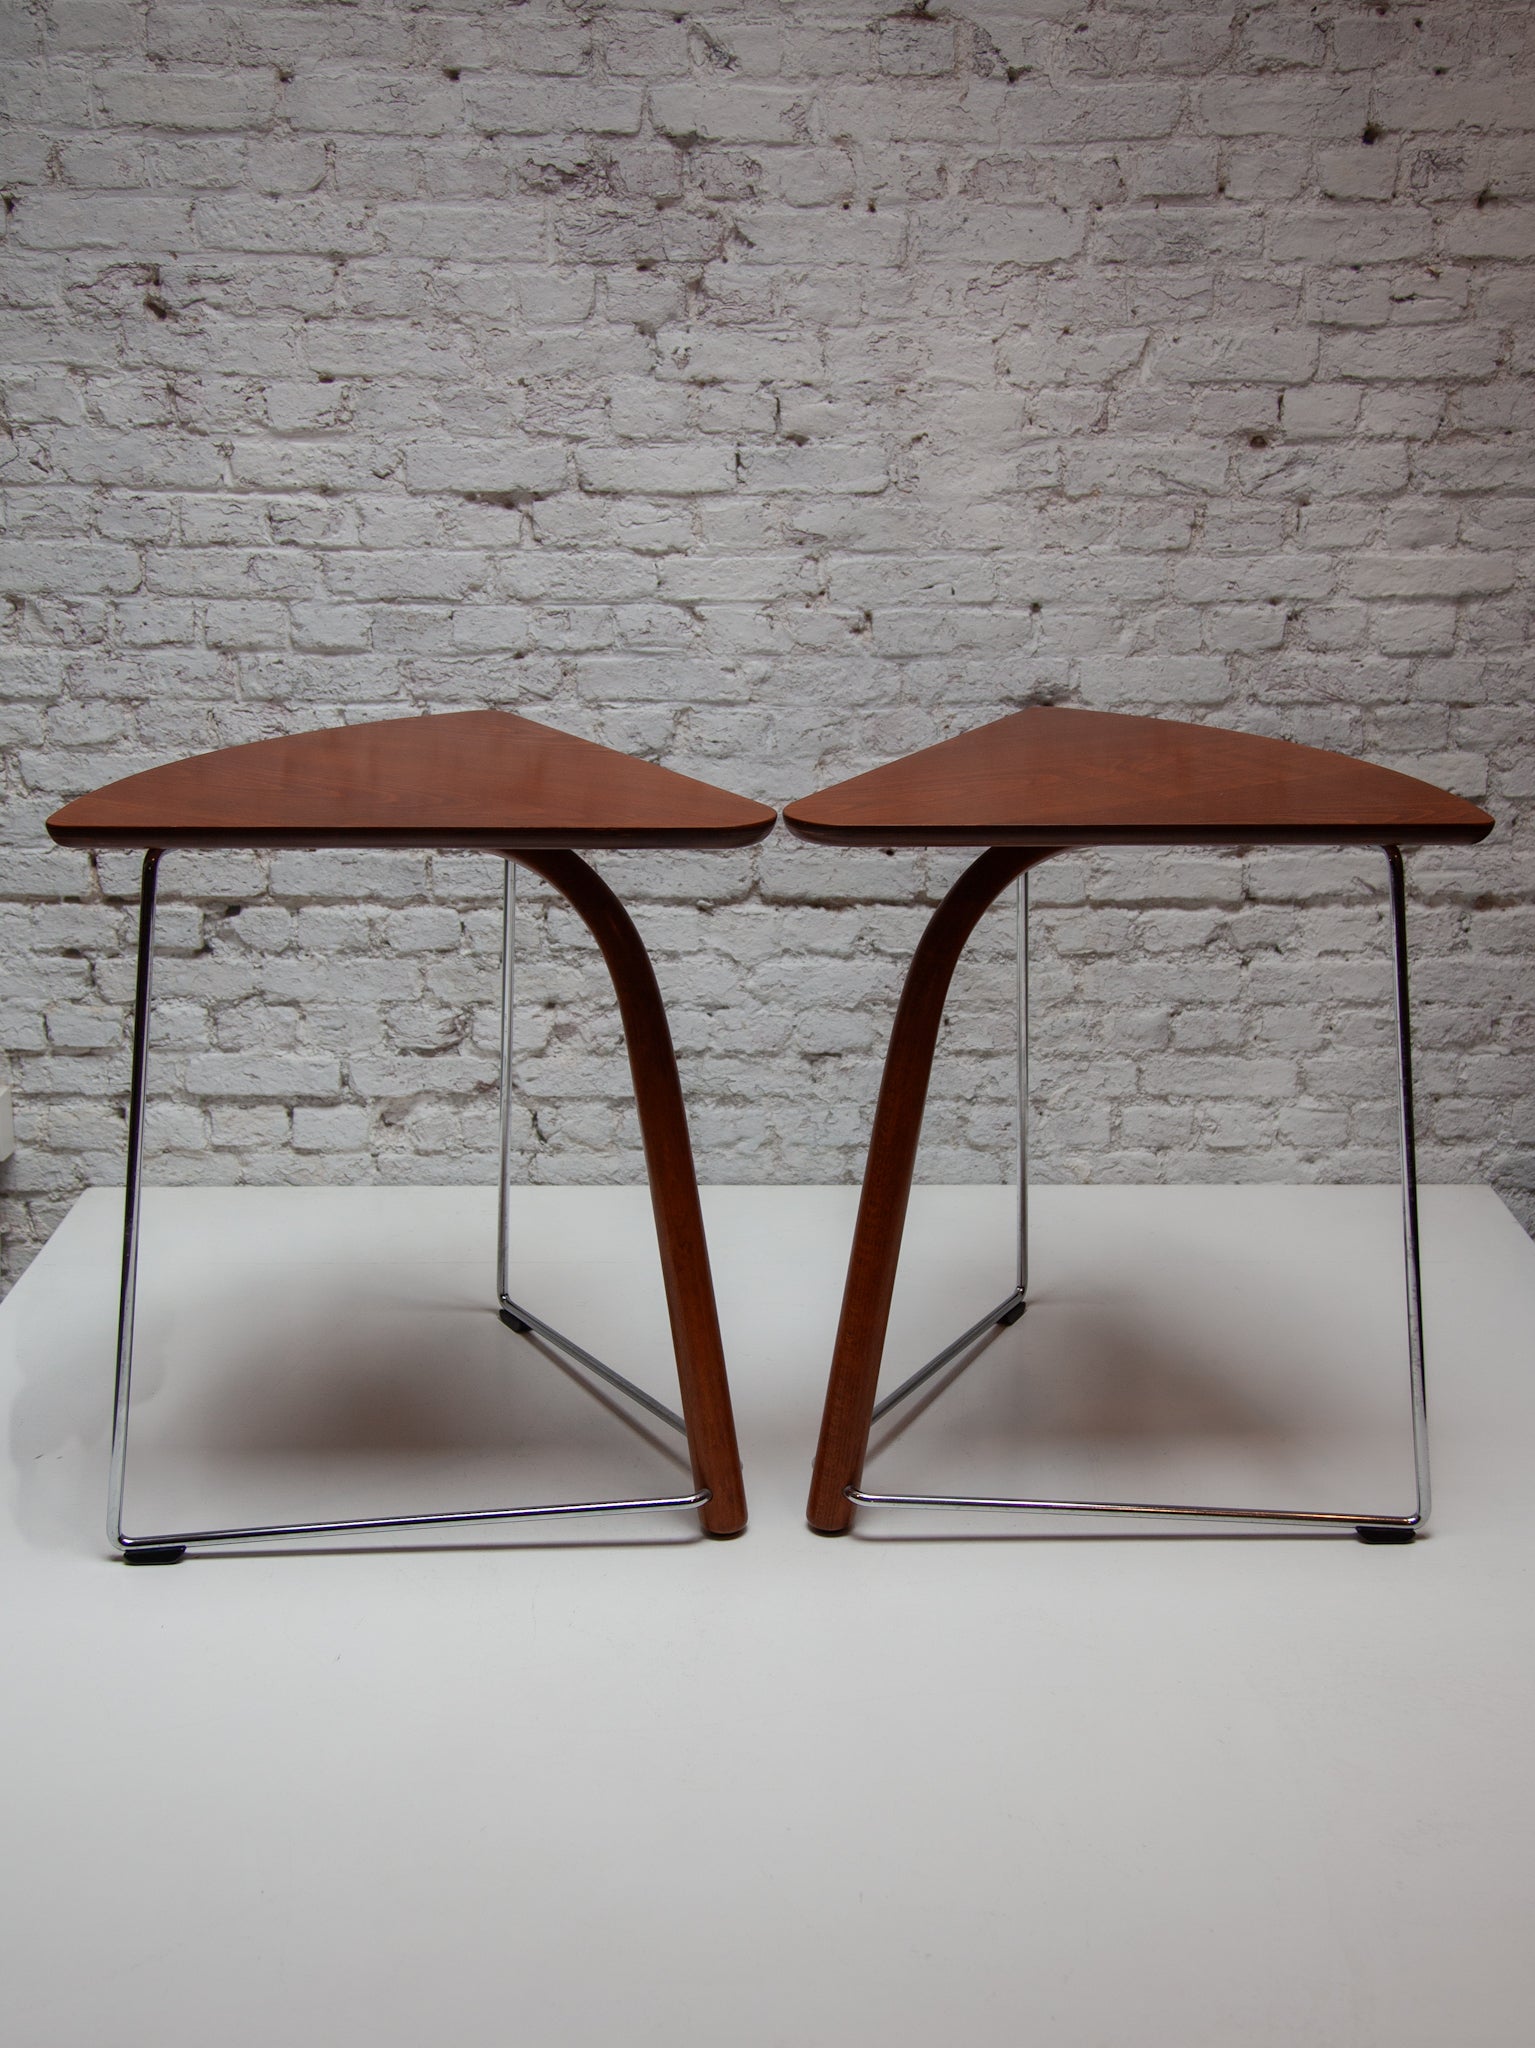 Set of two Thonet side tables designed by Wulf Schneider and Ulrich Böhme to match their S320 chair featured a steam bent wood front leg , inspired by Thonet’s long tradition of steam bent furniture combined with chromed bar steel back legs and